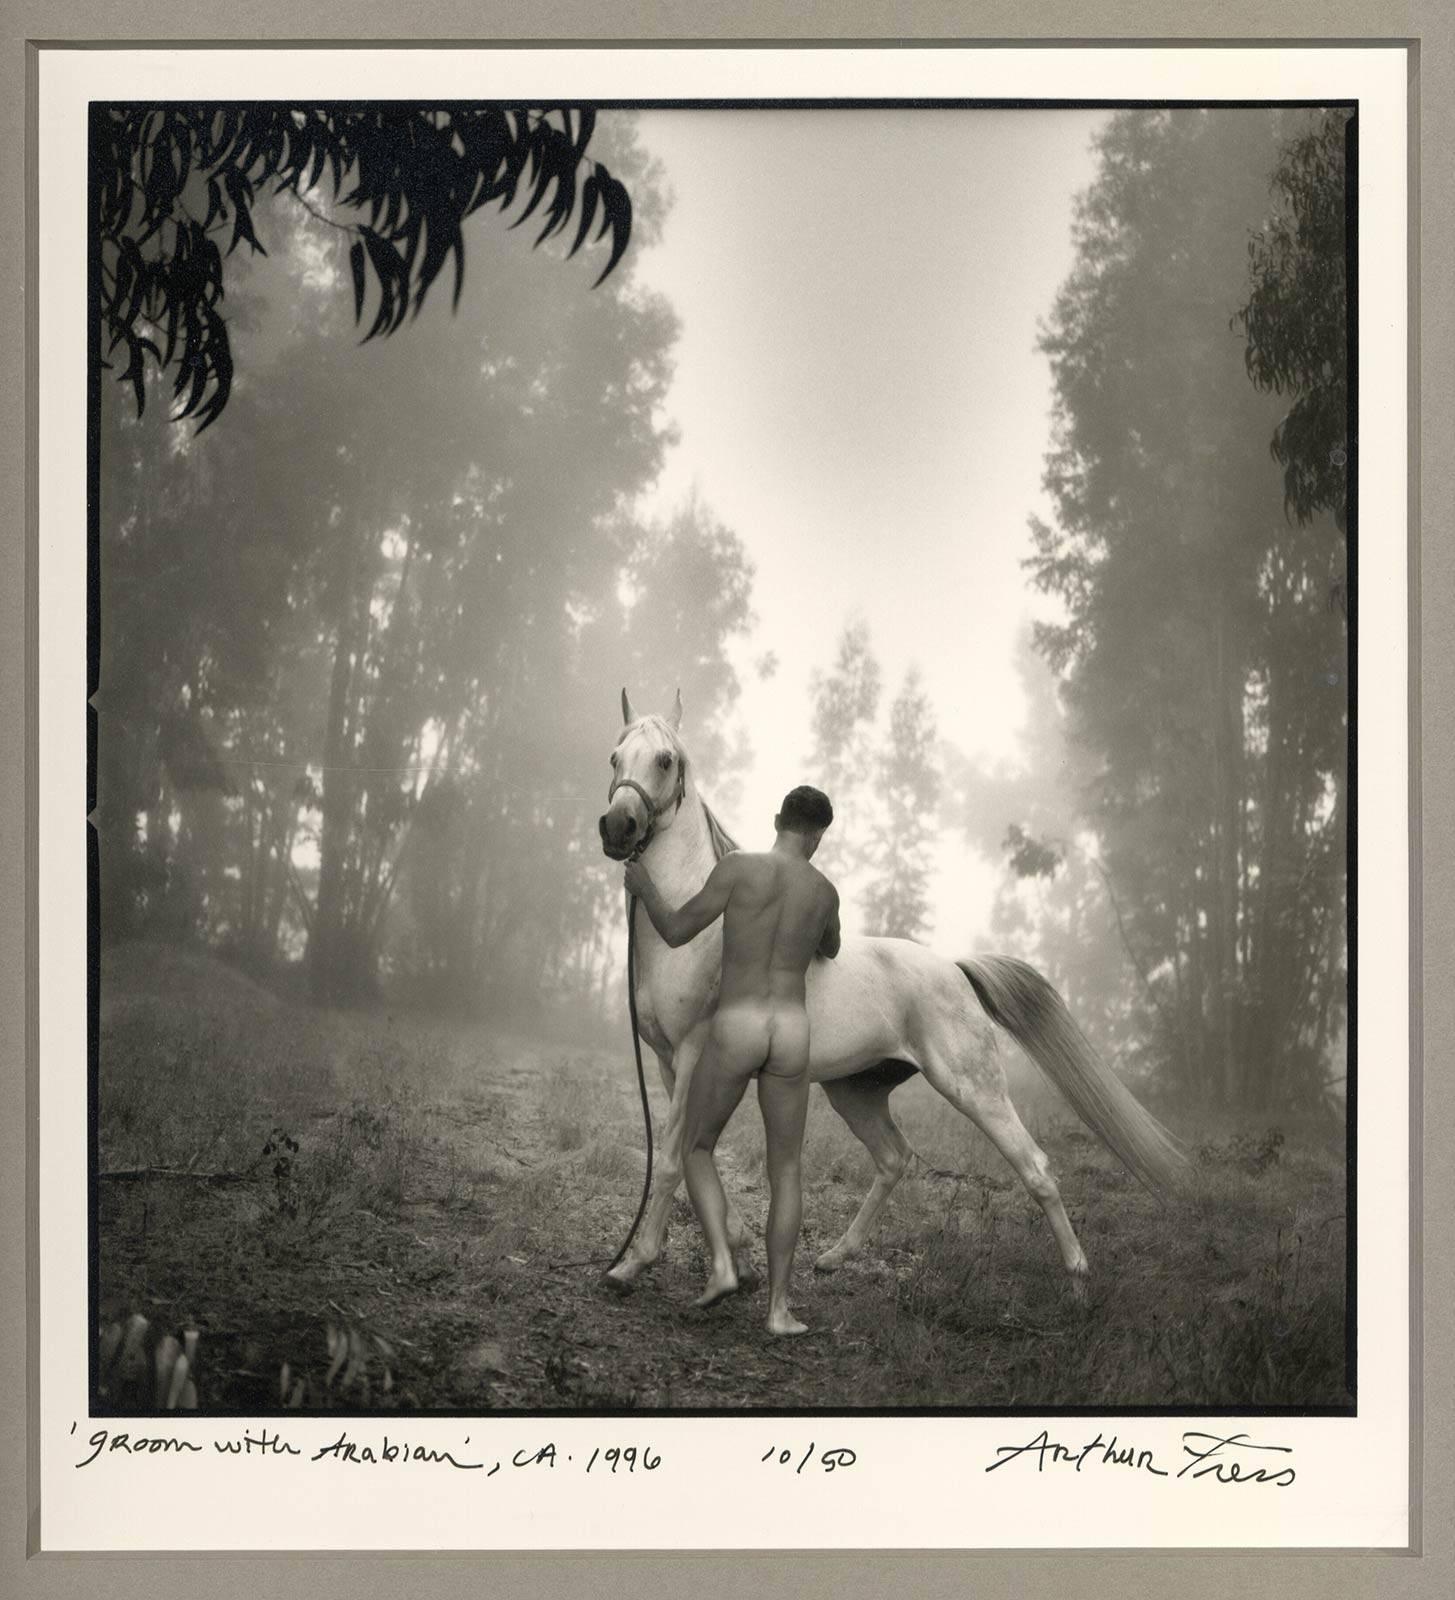 Arthur Tress Nude Photograph - Groom with Arabian (white stallion groomed by a nude male in a leafy landscape)